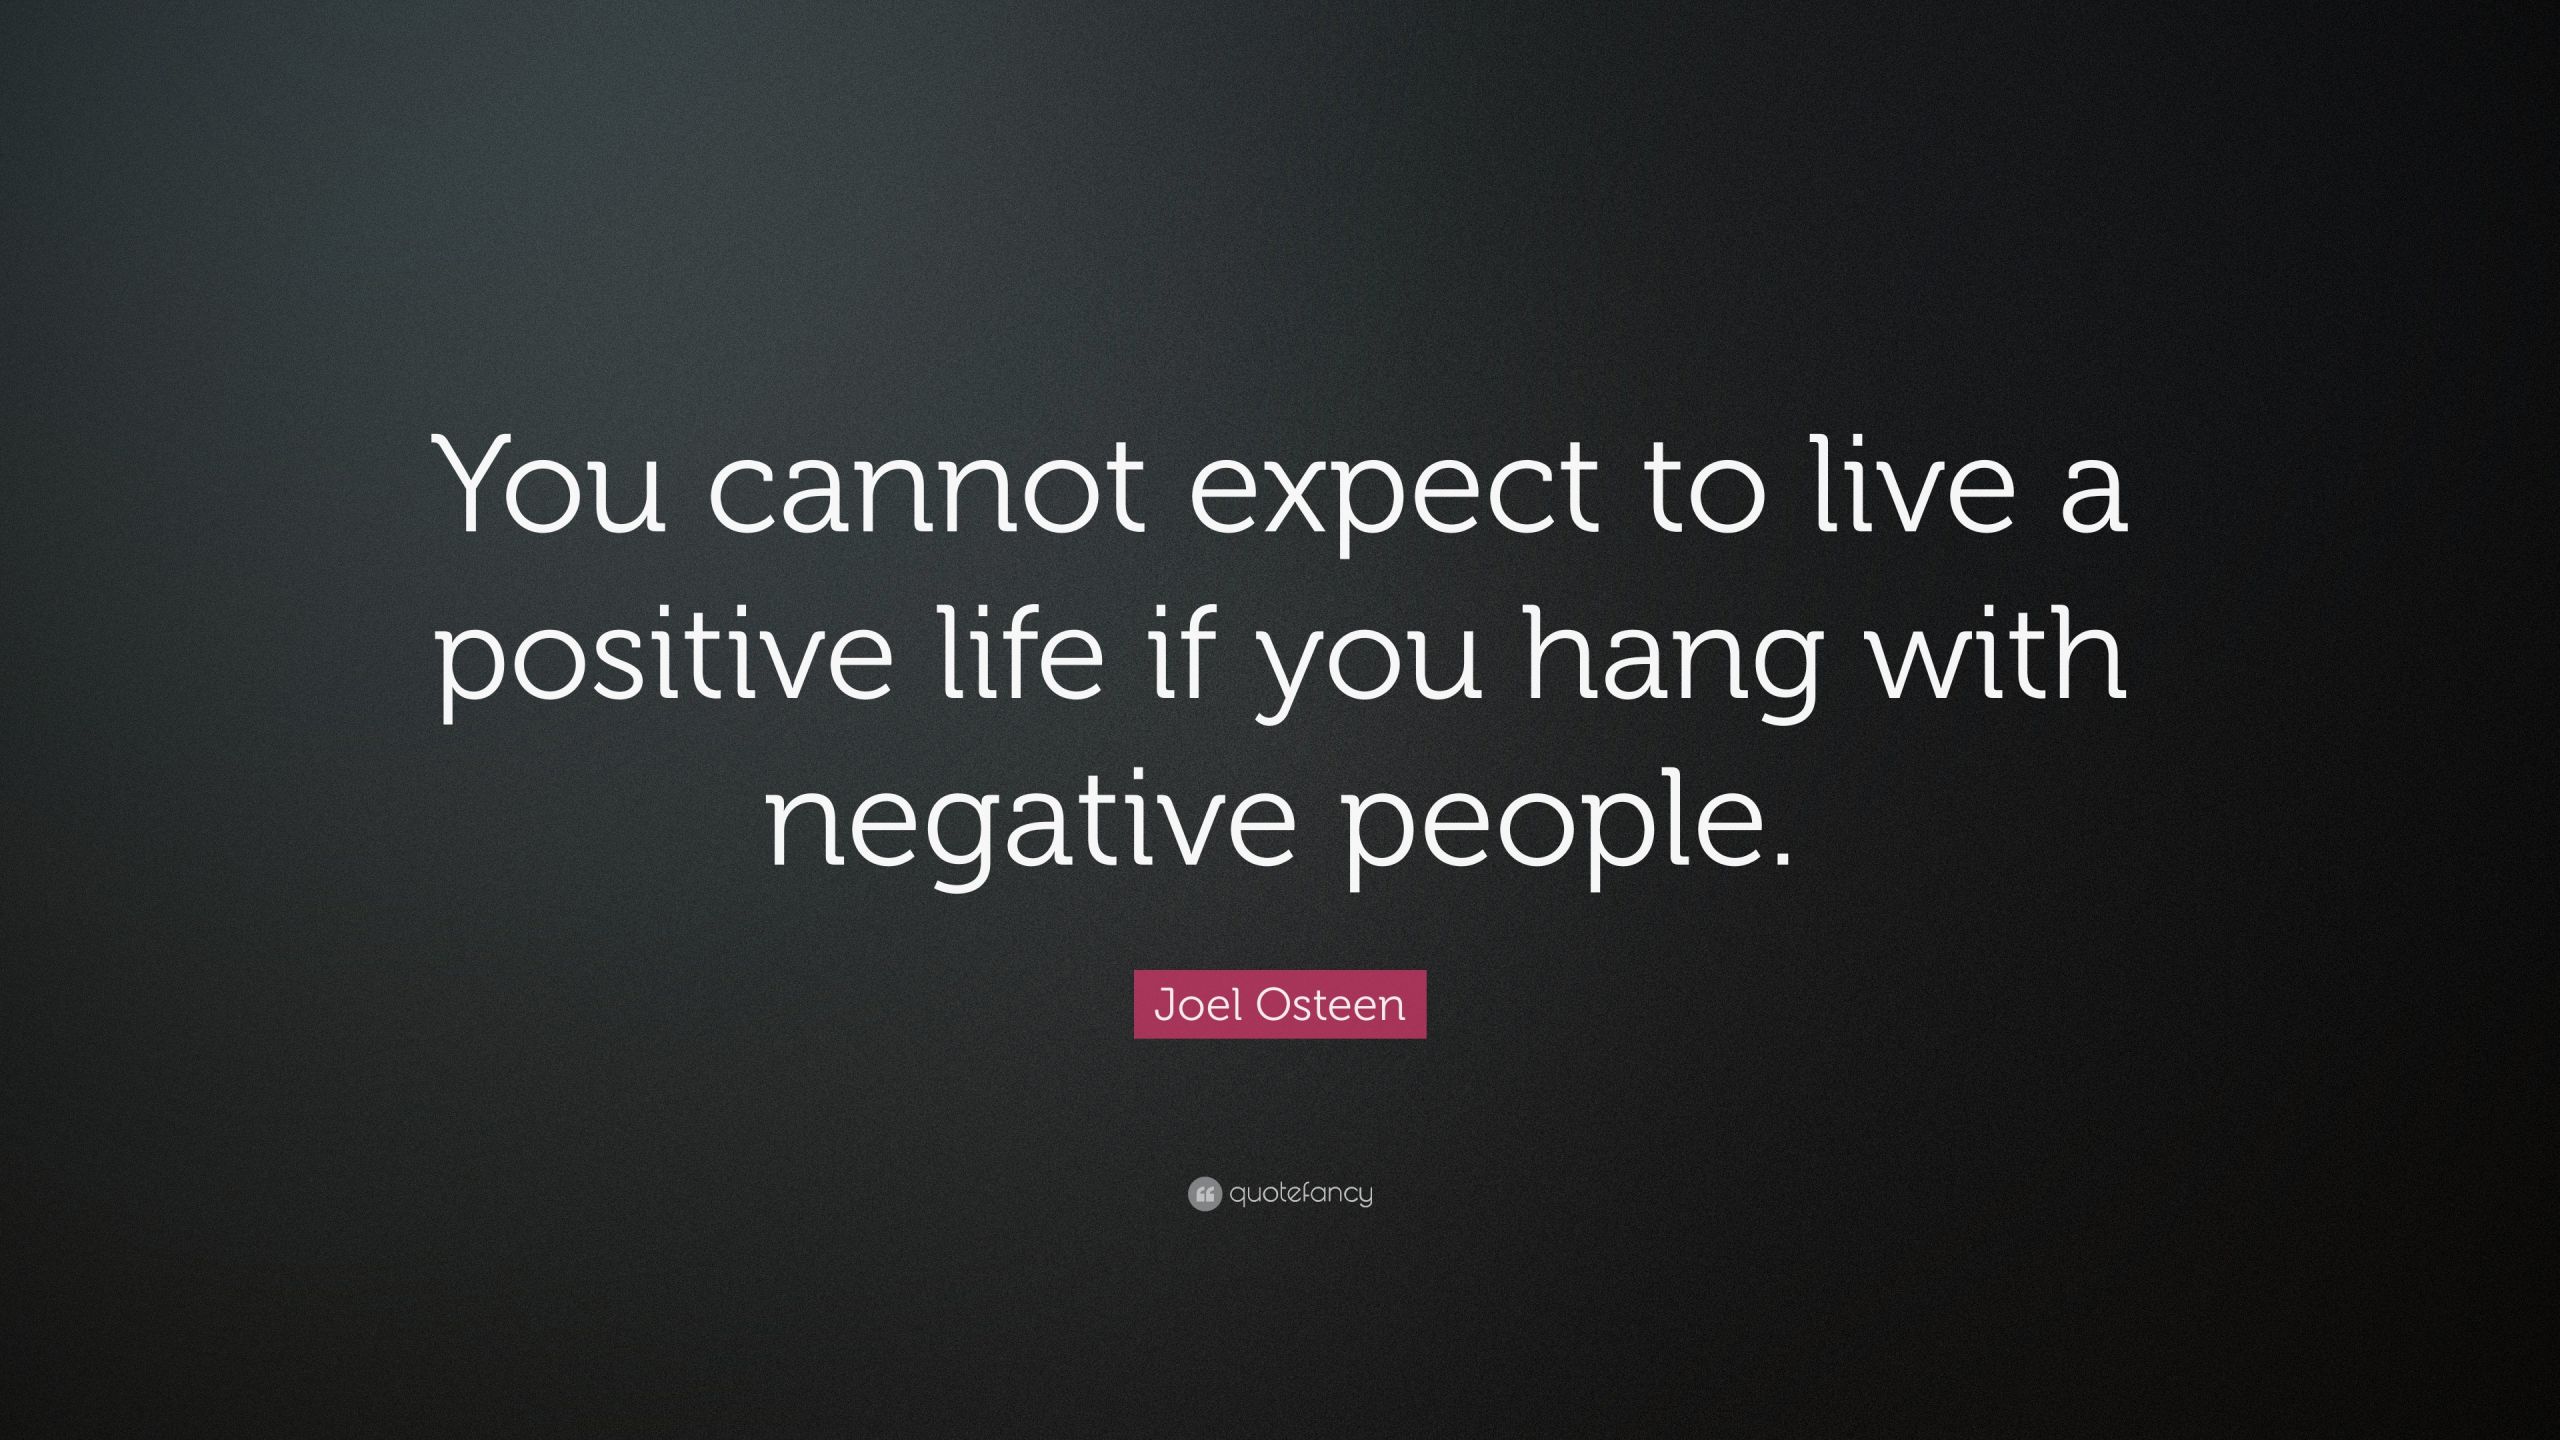 Joel Osteen Quotes About Life
 Joel Osteen Quote “You cannot expect to live a positive